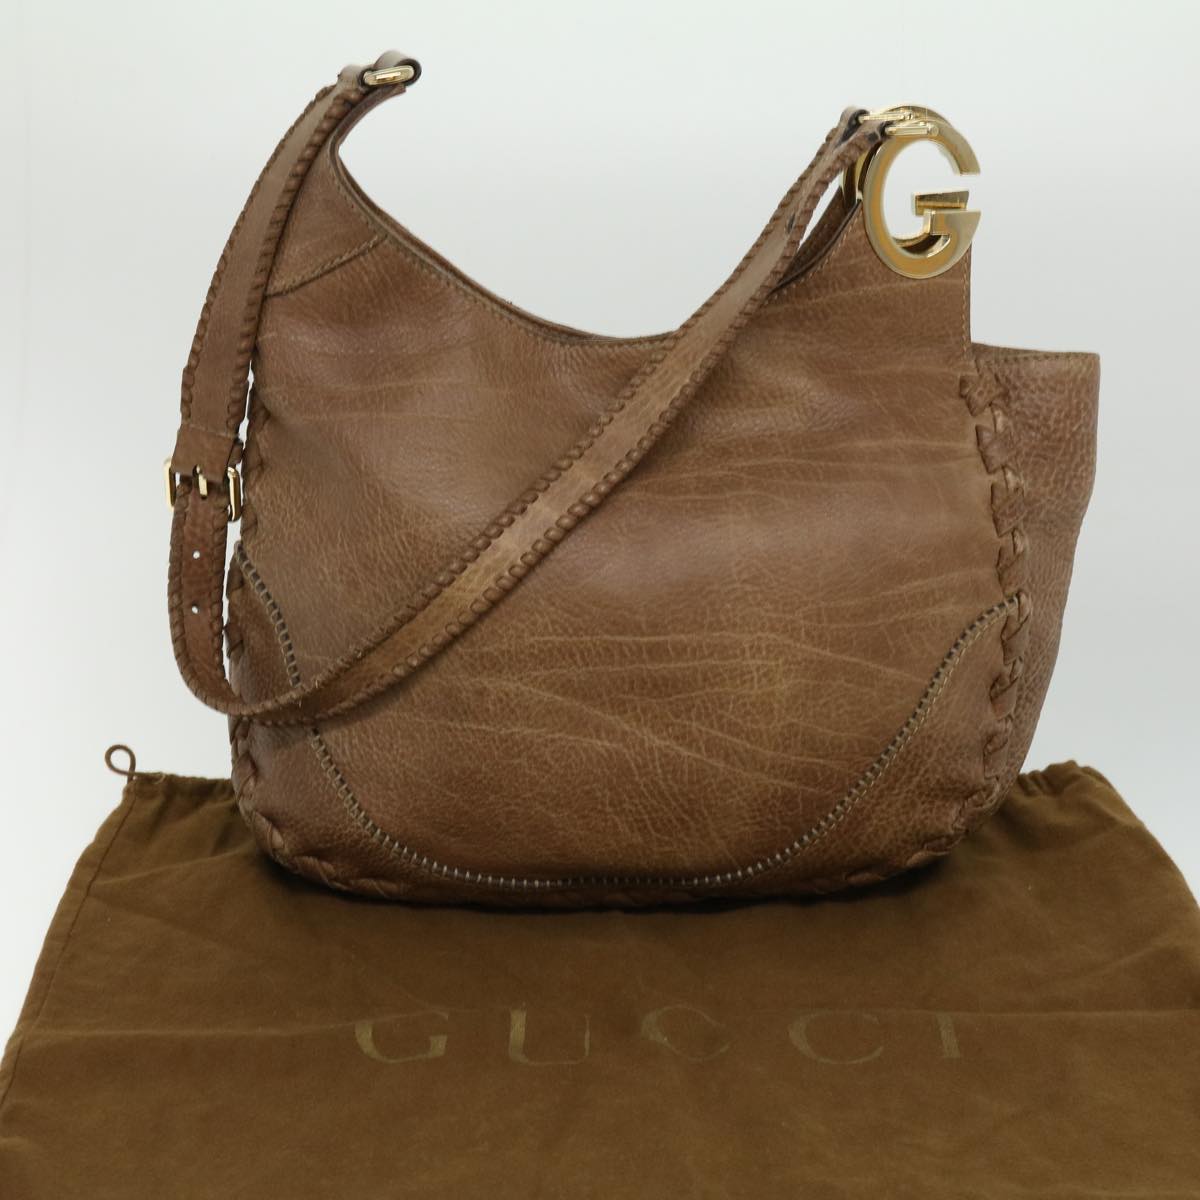 GUCCI Shoulder Bag Leather Brown 218781212792 Auth im376